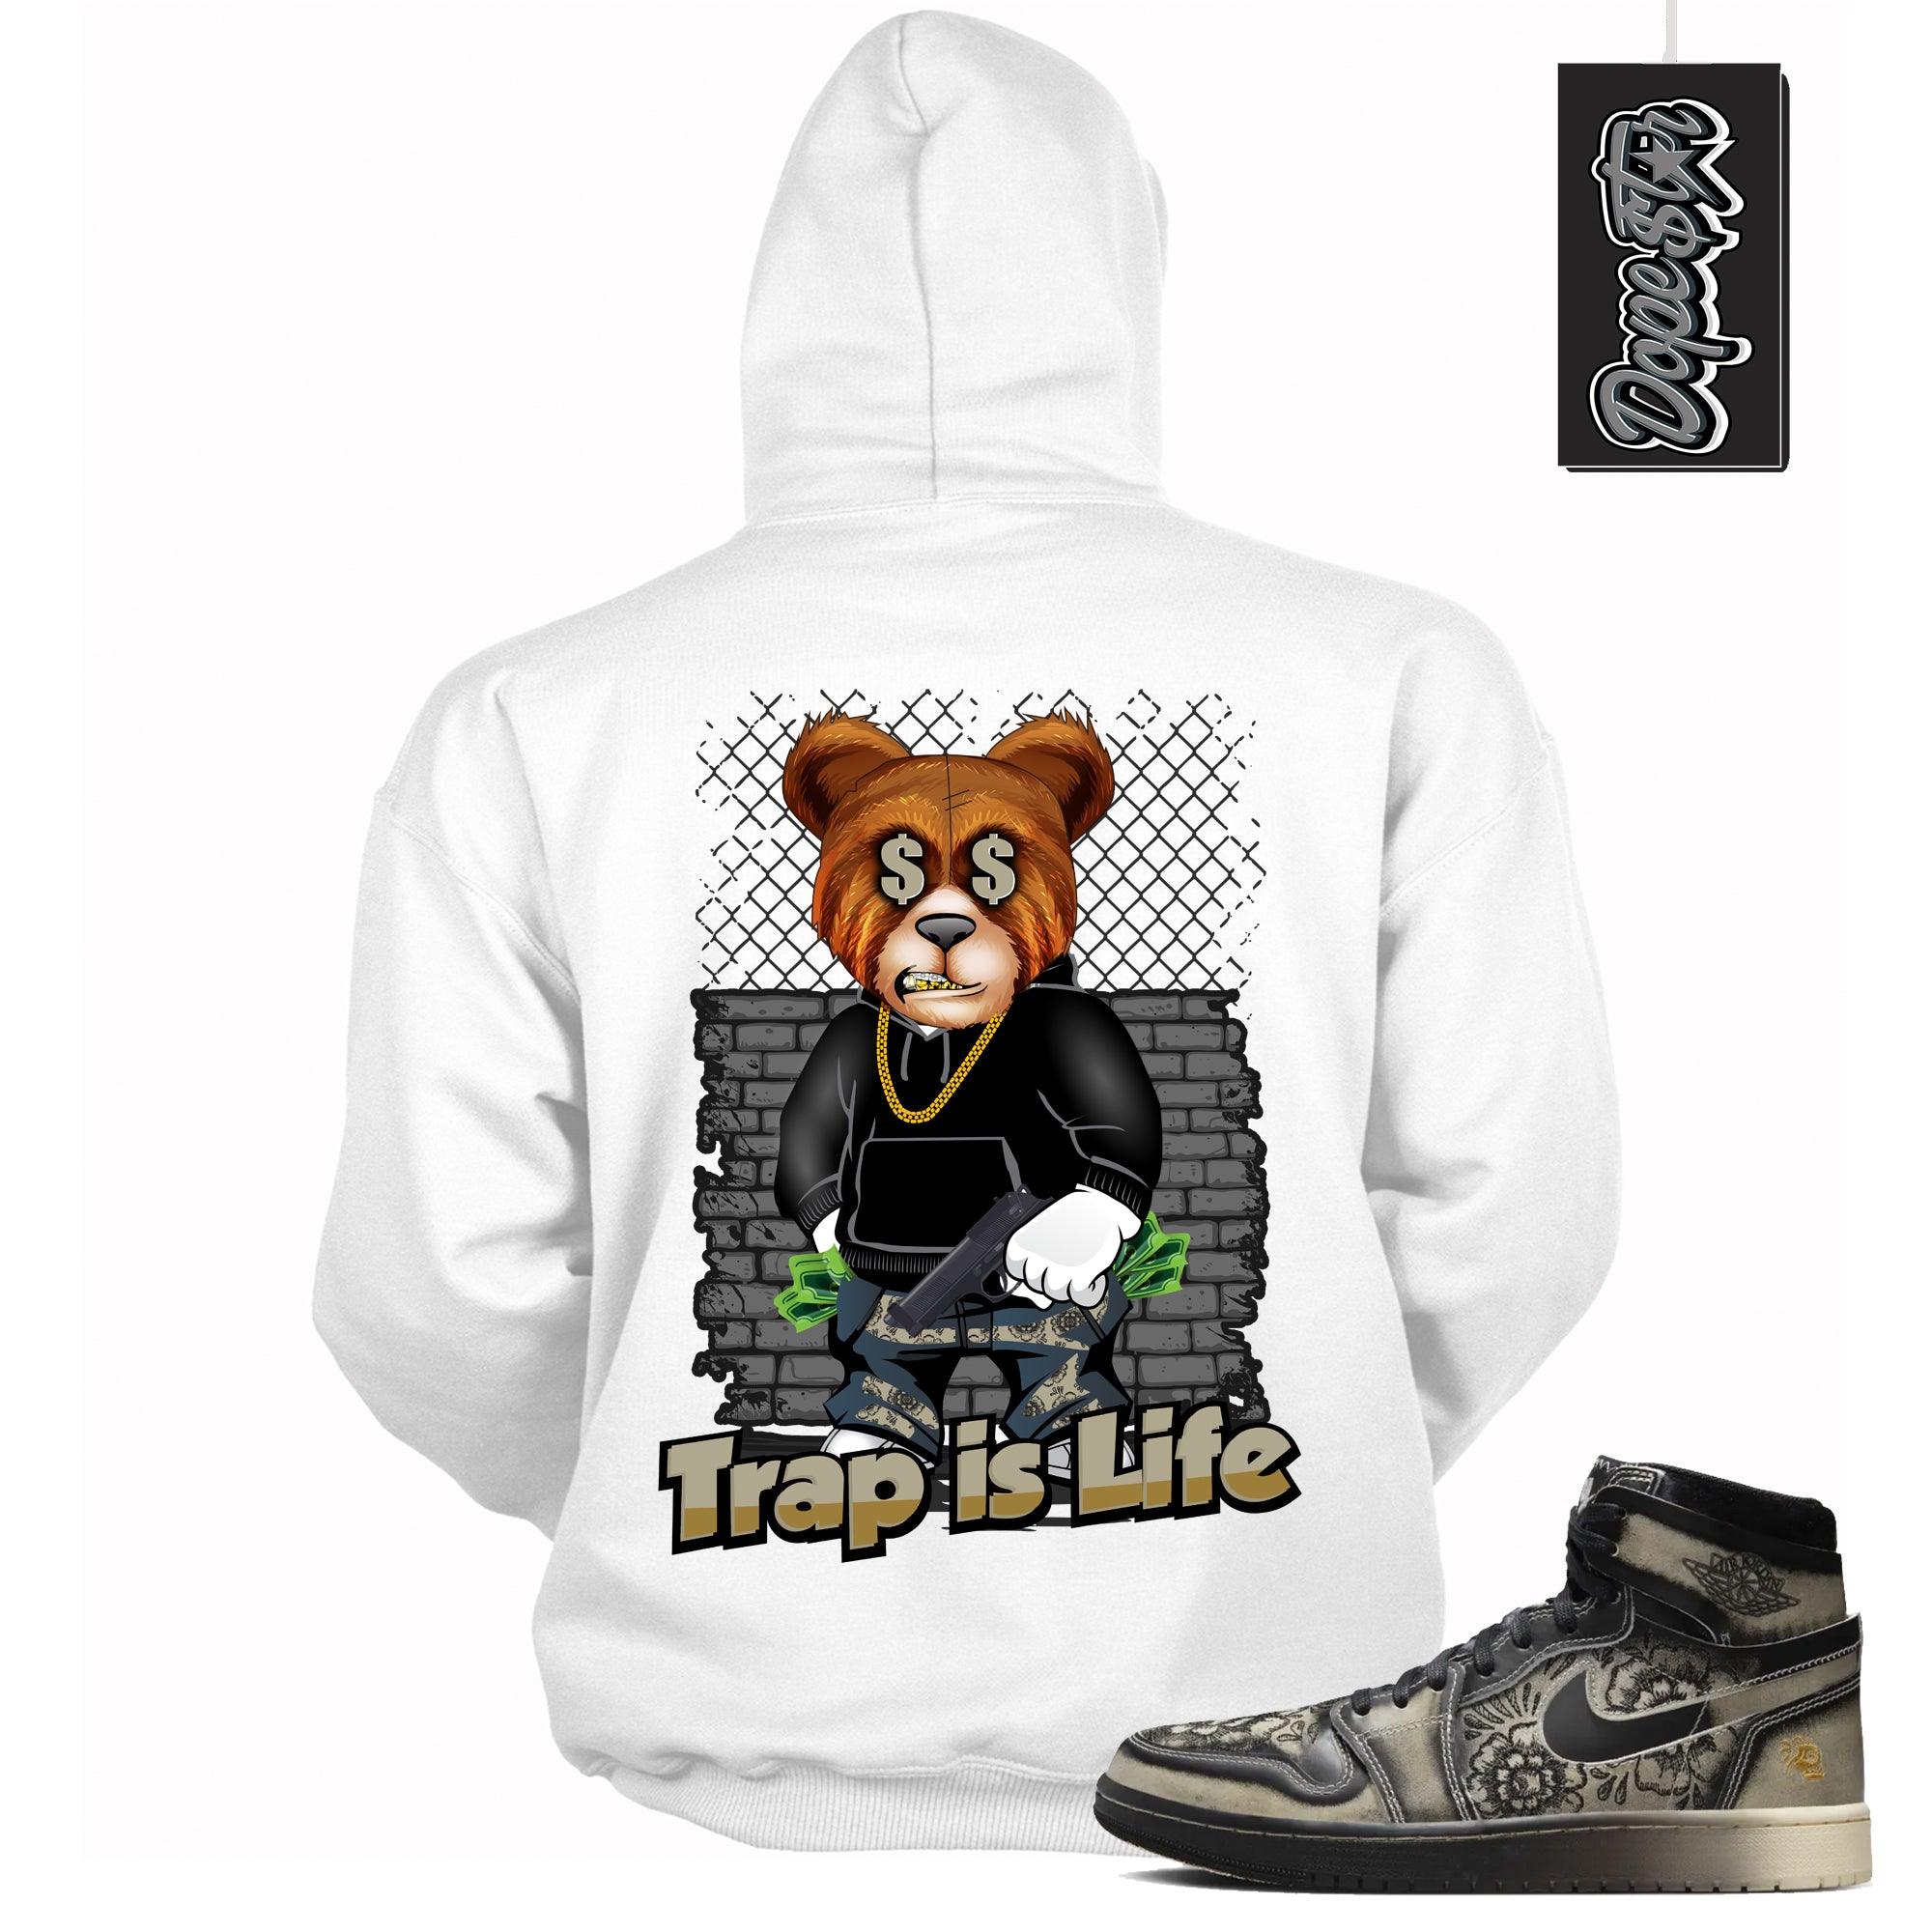 Cool White Graphic Hoodie with “ TRAP IS LIFE “ print, that perfectly matches Air Jordan 1 High Zoom Comfort 2 Dia de Muertos Black and Pale Ivory sneakers